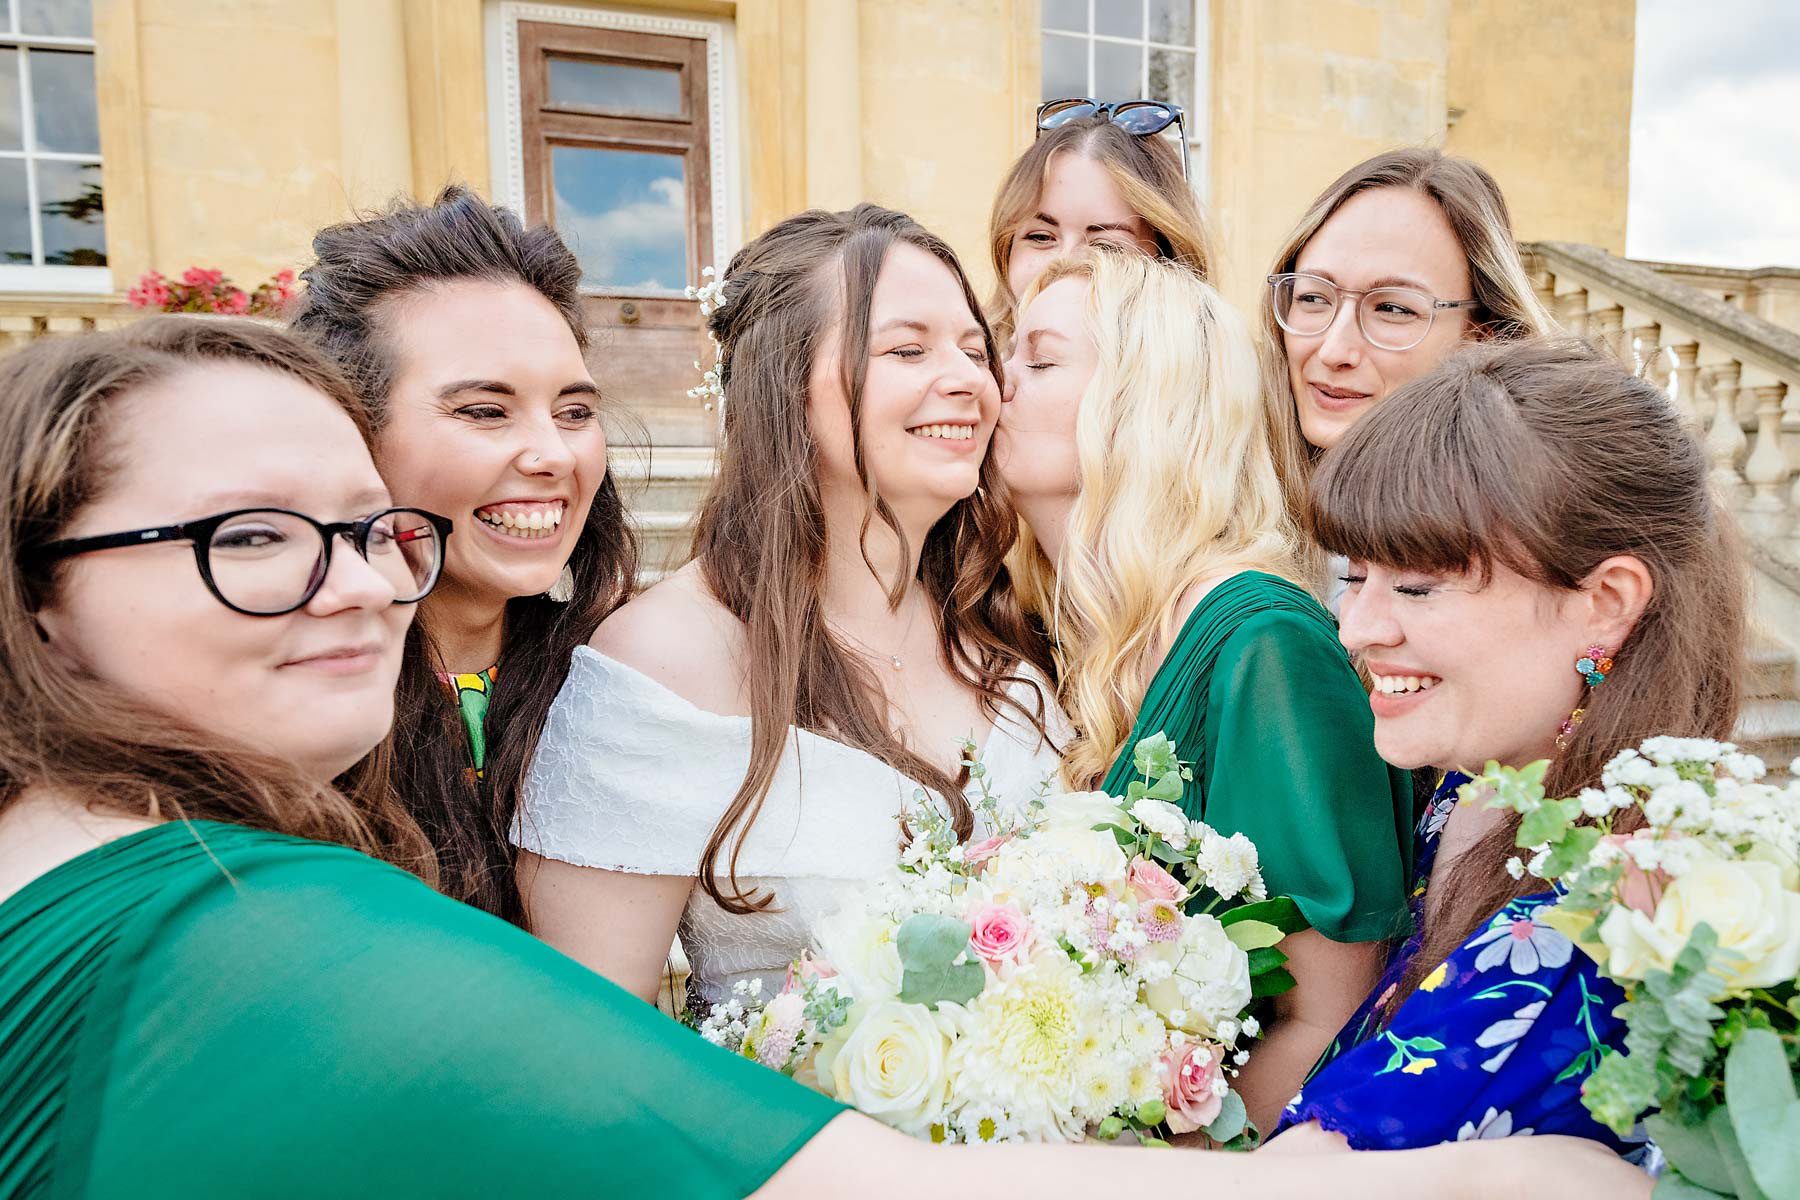 A bridesmaid kissing the bride on the cheek with friends gathered around